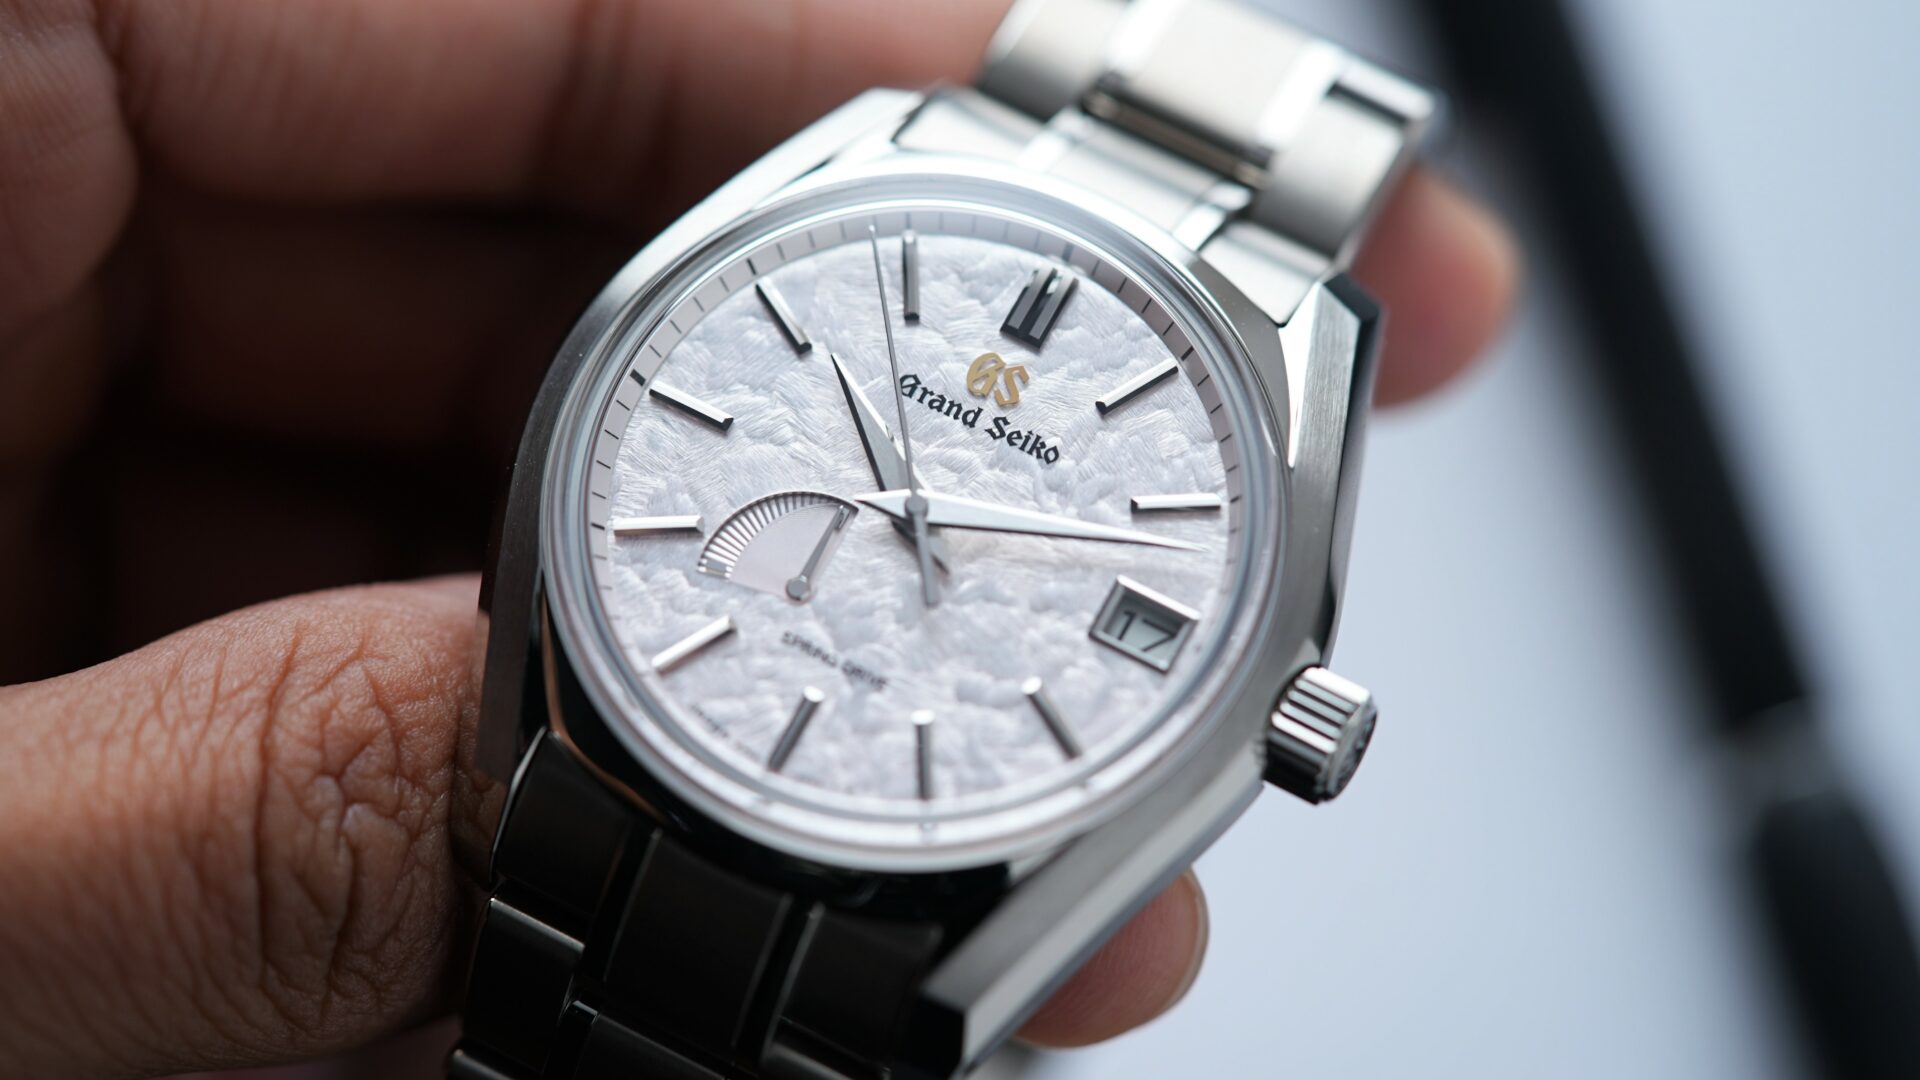 Grand Seiko Heritage Collection Seasons 'Spring' SBGA413 watch being held in hand.